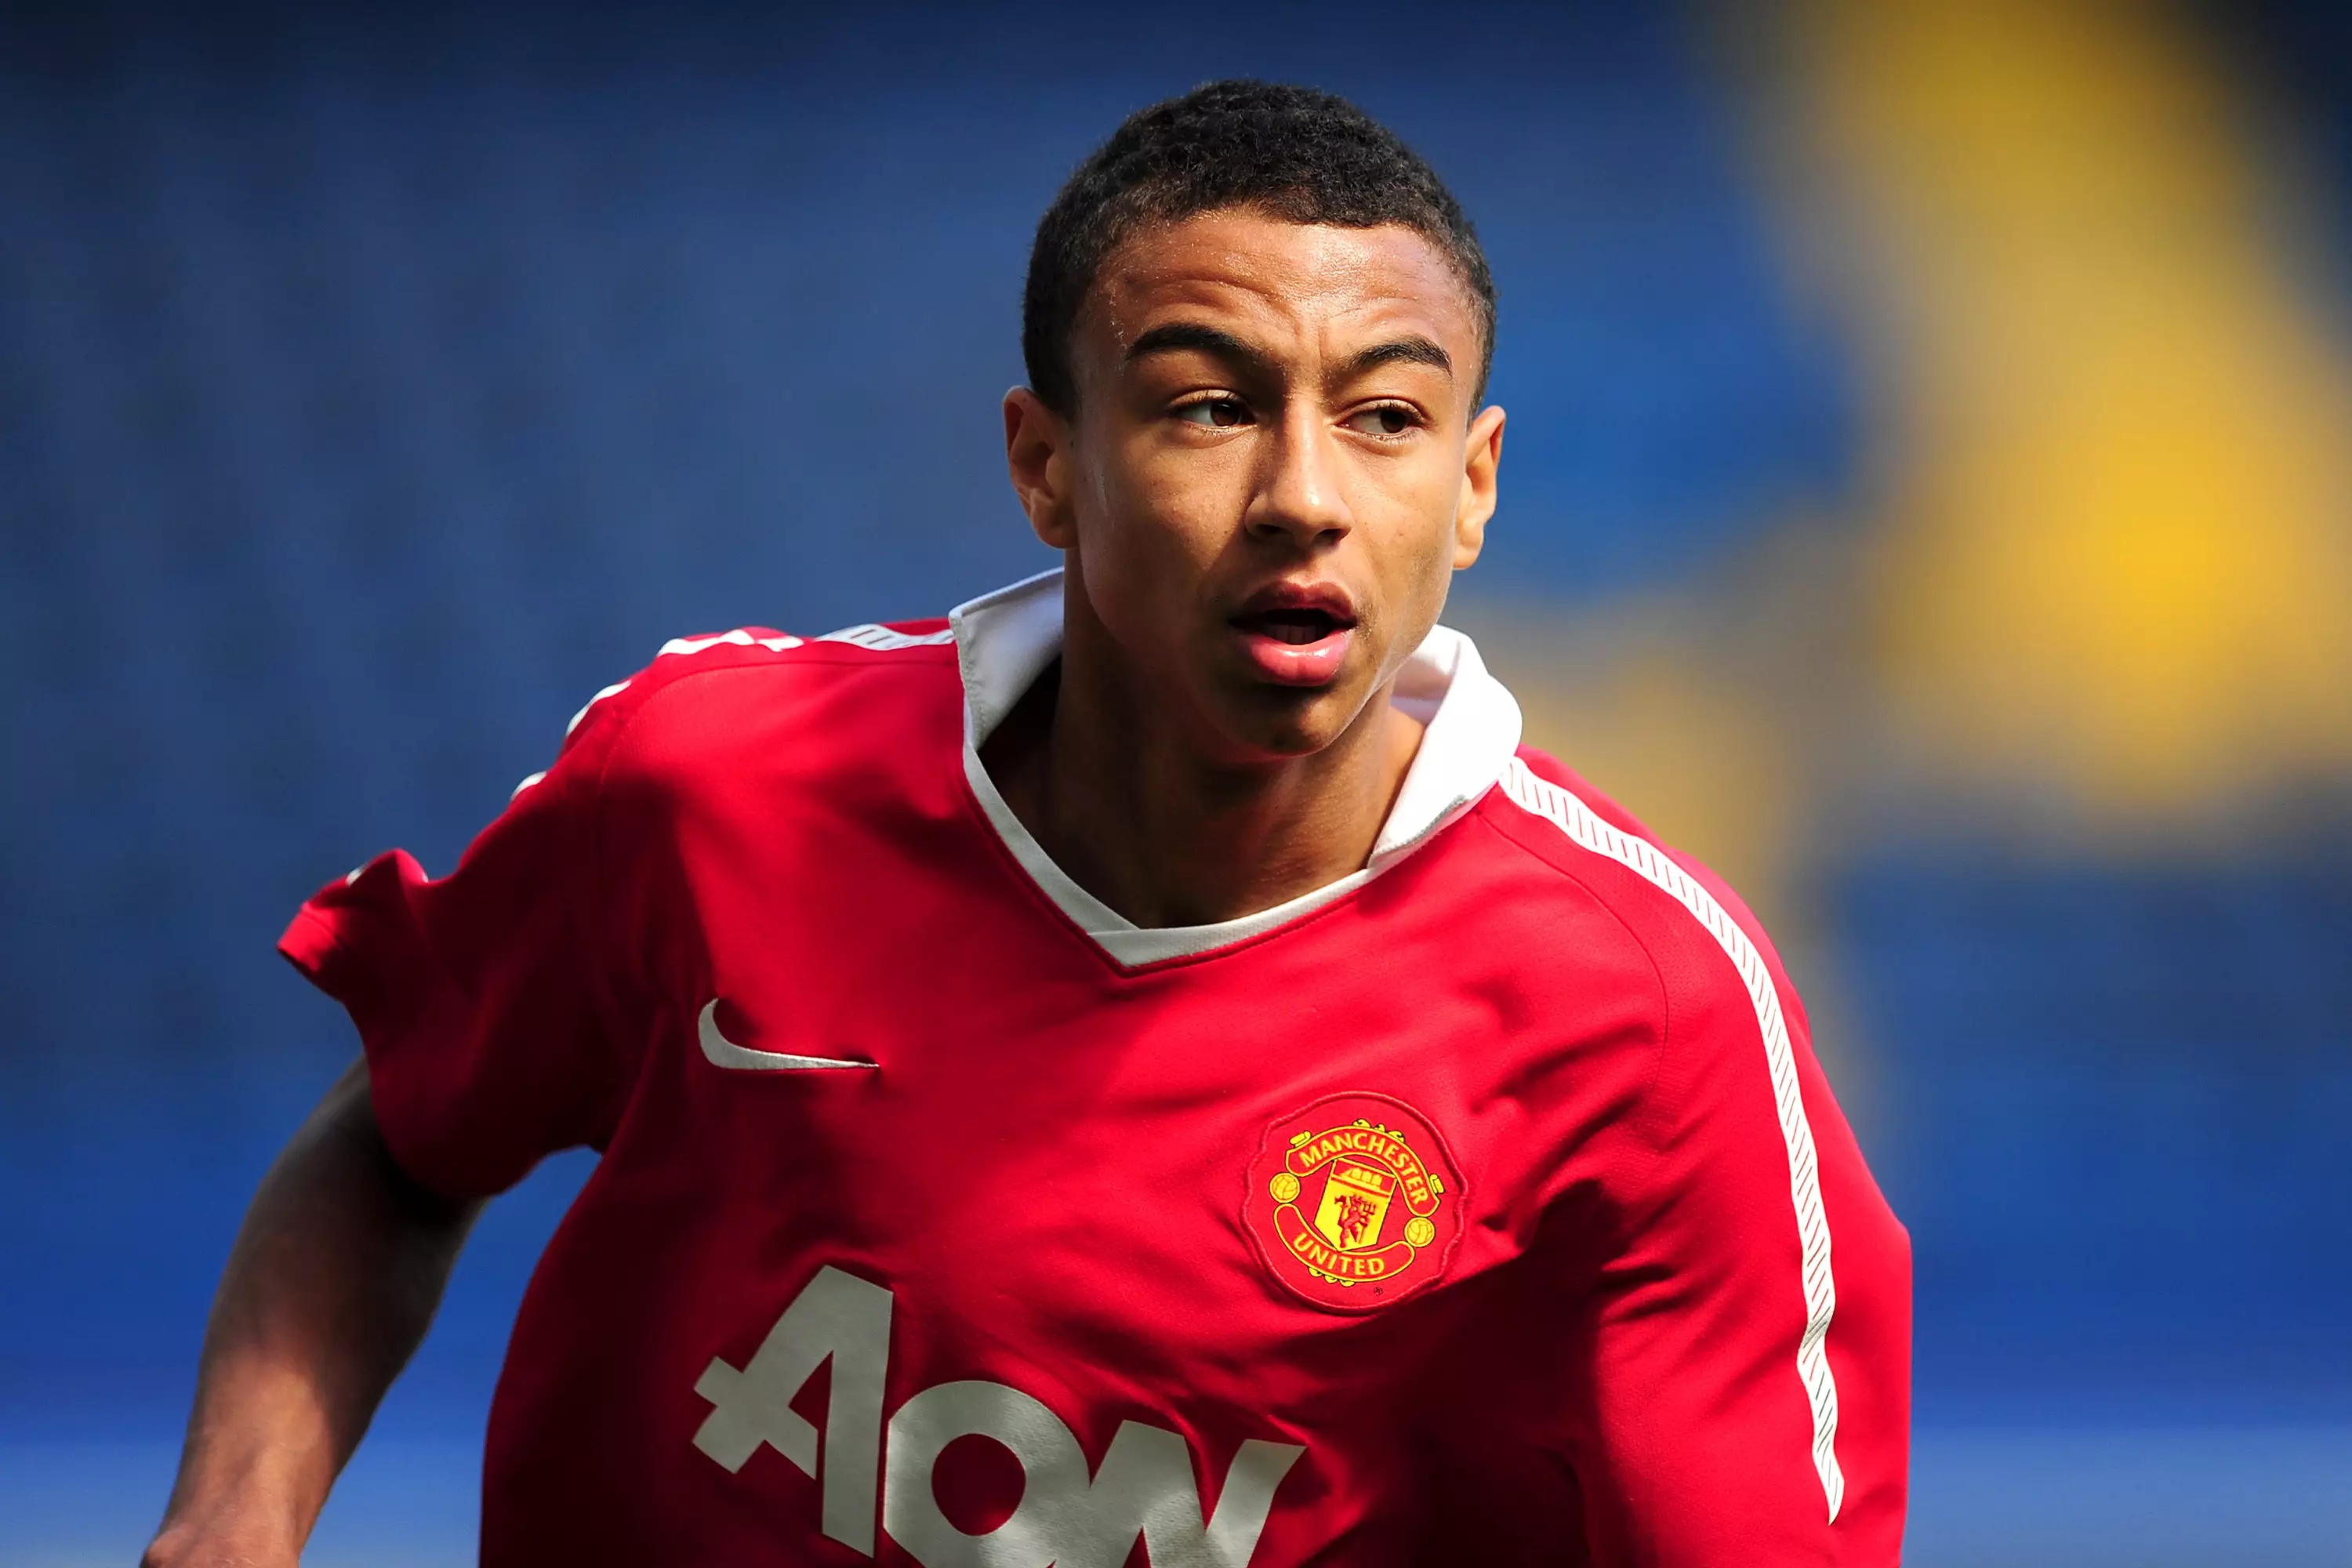 A young Lingard playing for United. Image: PA